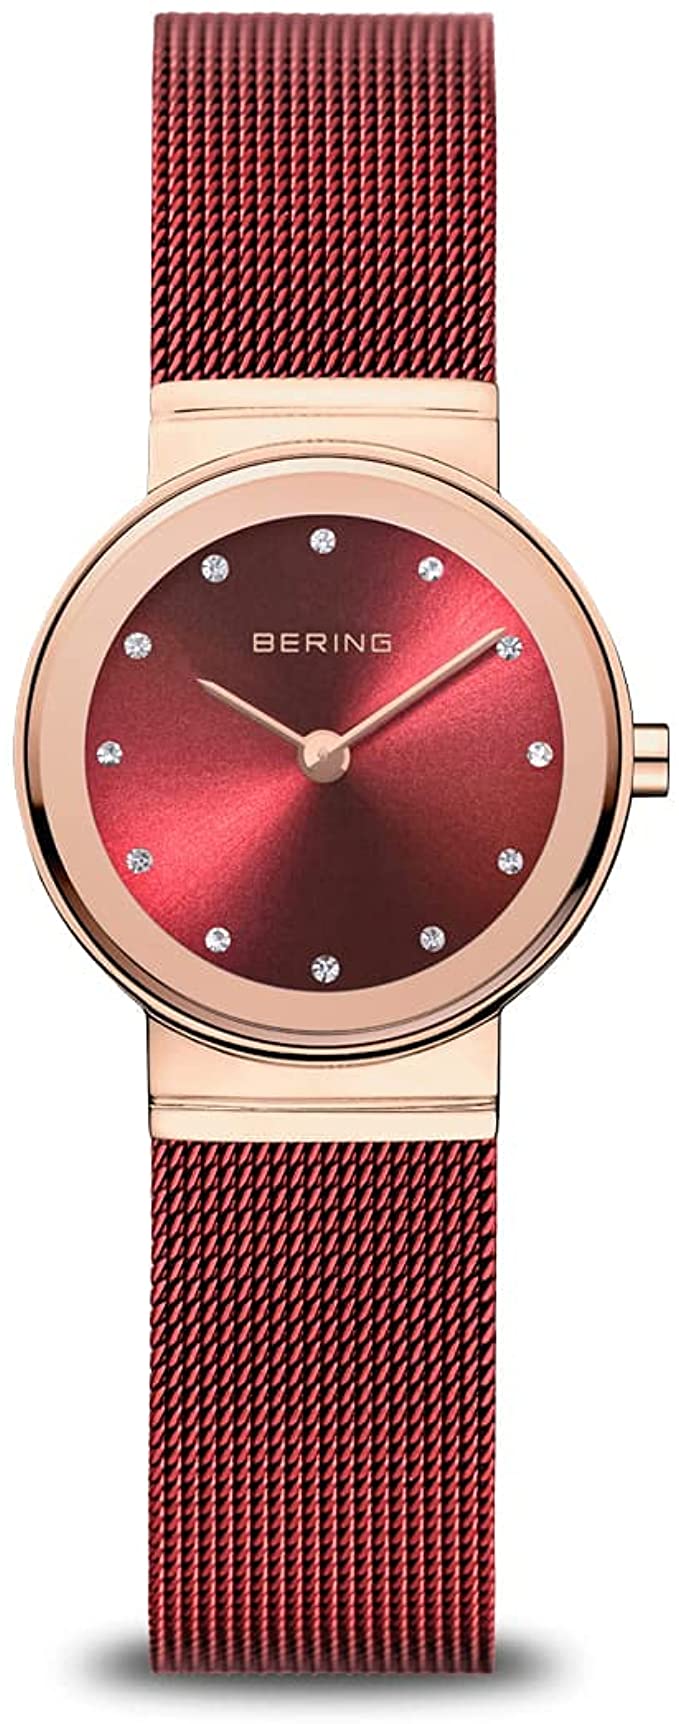 BERING Time | Women's Slim Watch 10126-363 | 26MM Case | Classic Collection | Stainless Steel Strap | Scratch-Resistant Sapphire Crystal | Minimalistic - Designed in Denmark